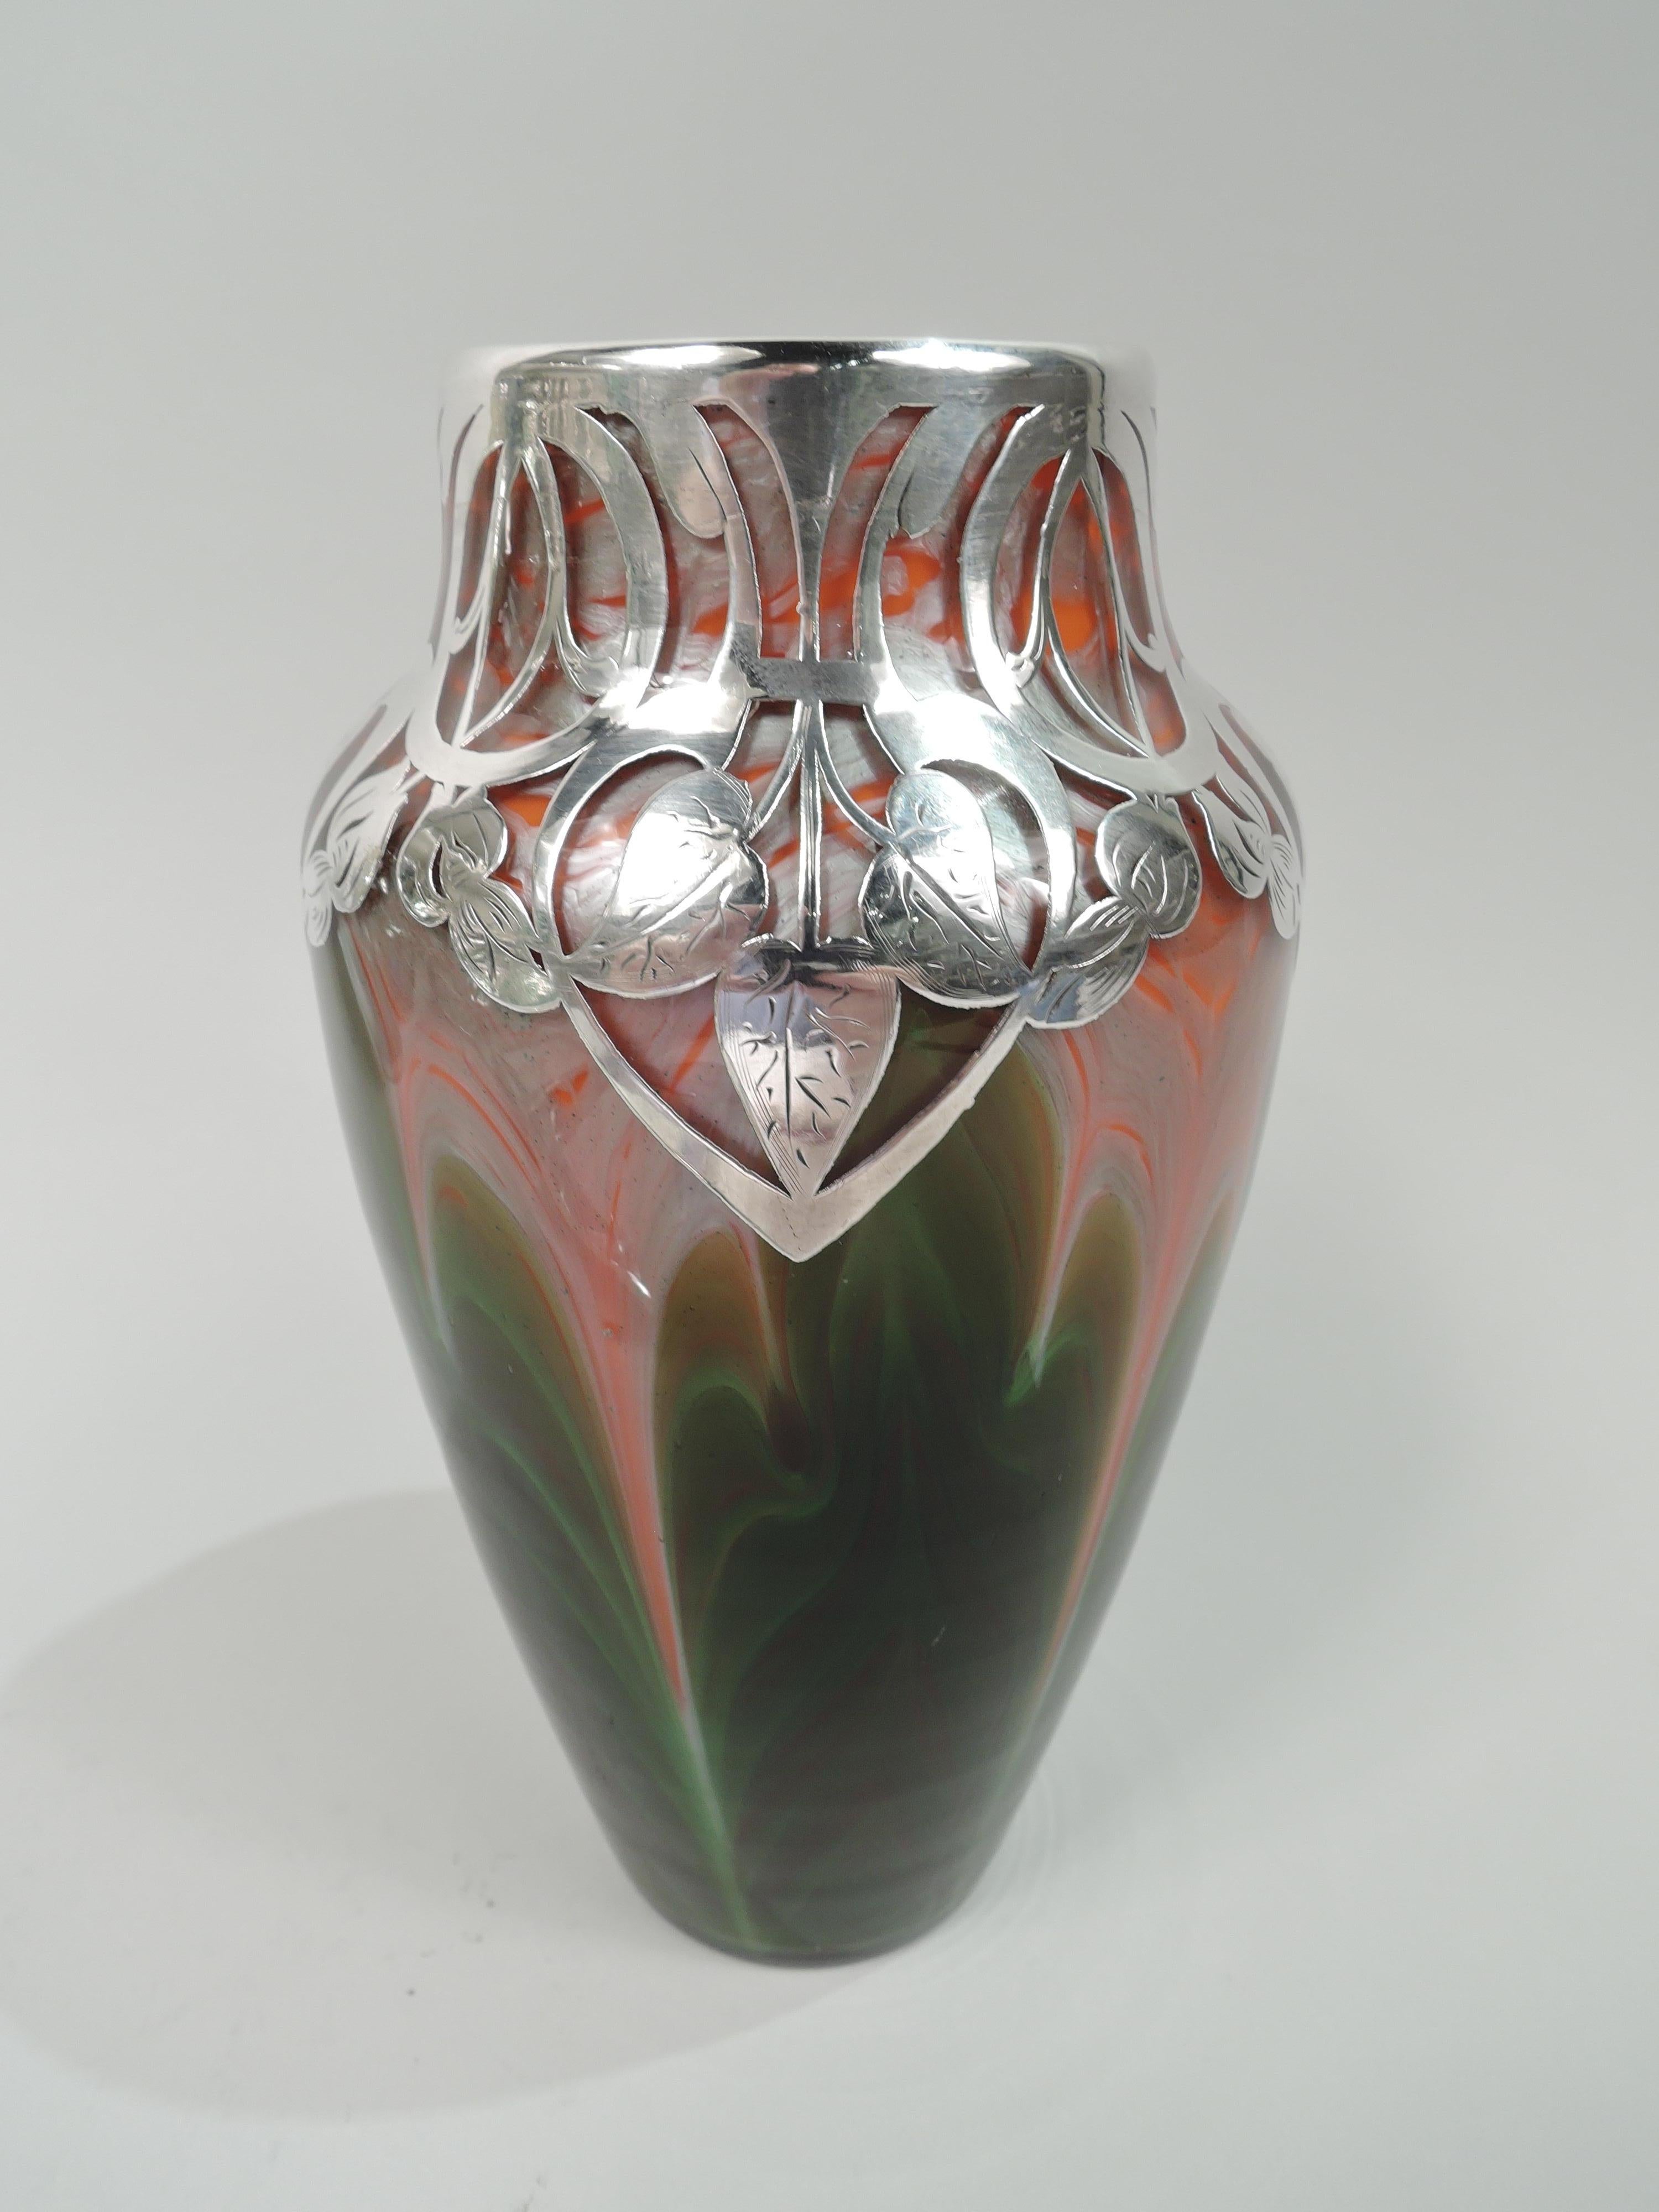 Striking turn-of-the-century glass vase by historic Loetz with engraved silver overlay. Ovoid with short and inset neck. Jugendstil-style overlay in controlled geometric pattern with circles and ovals as well as stylized leaves. Glass is iridescent